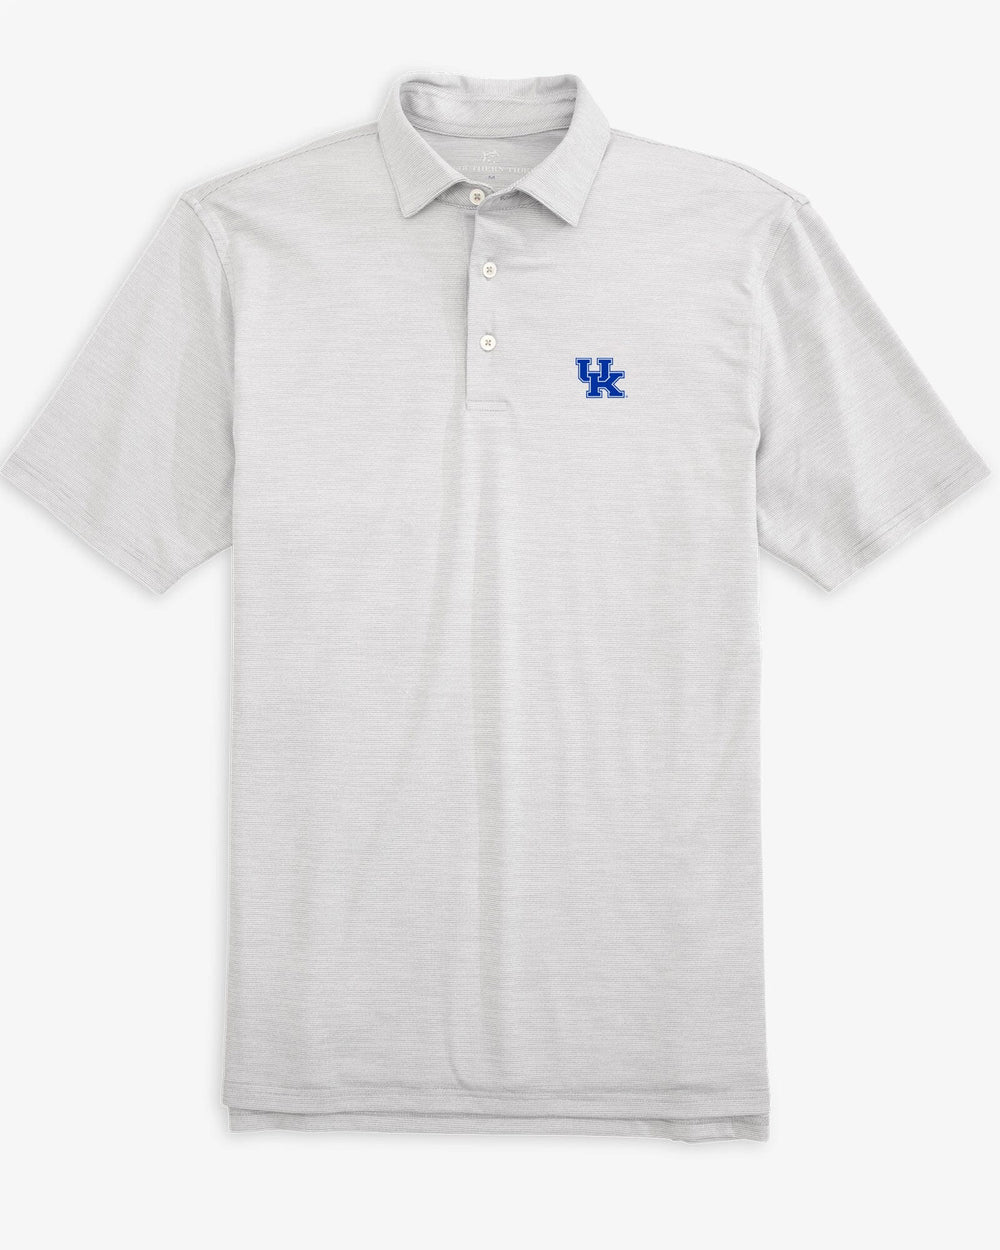 The  view of the Kentucky Wildcats Driver Spacedye Polo Shirt by Southern Tide - Slate Grey